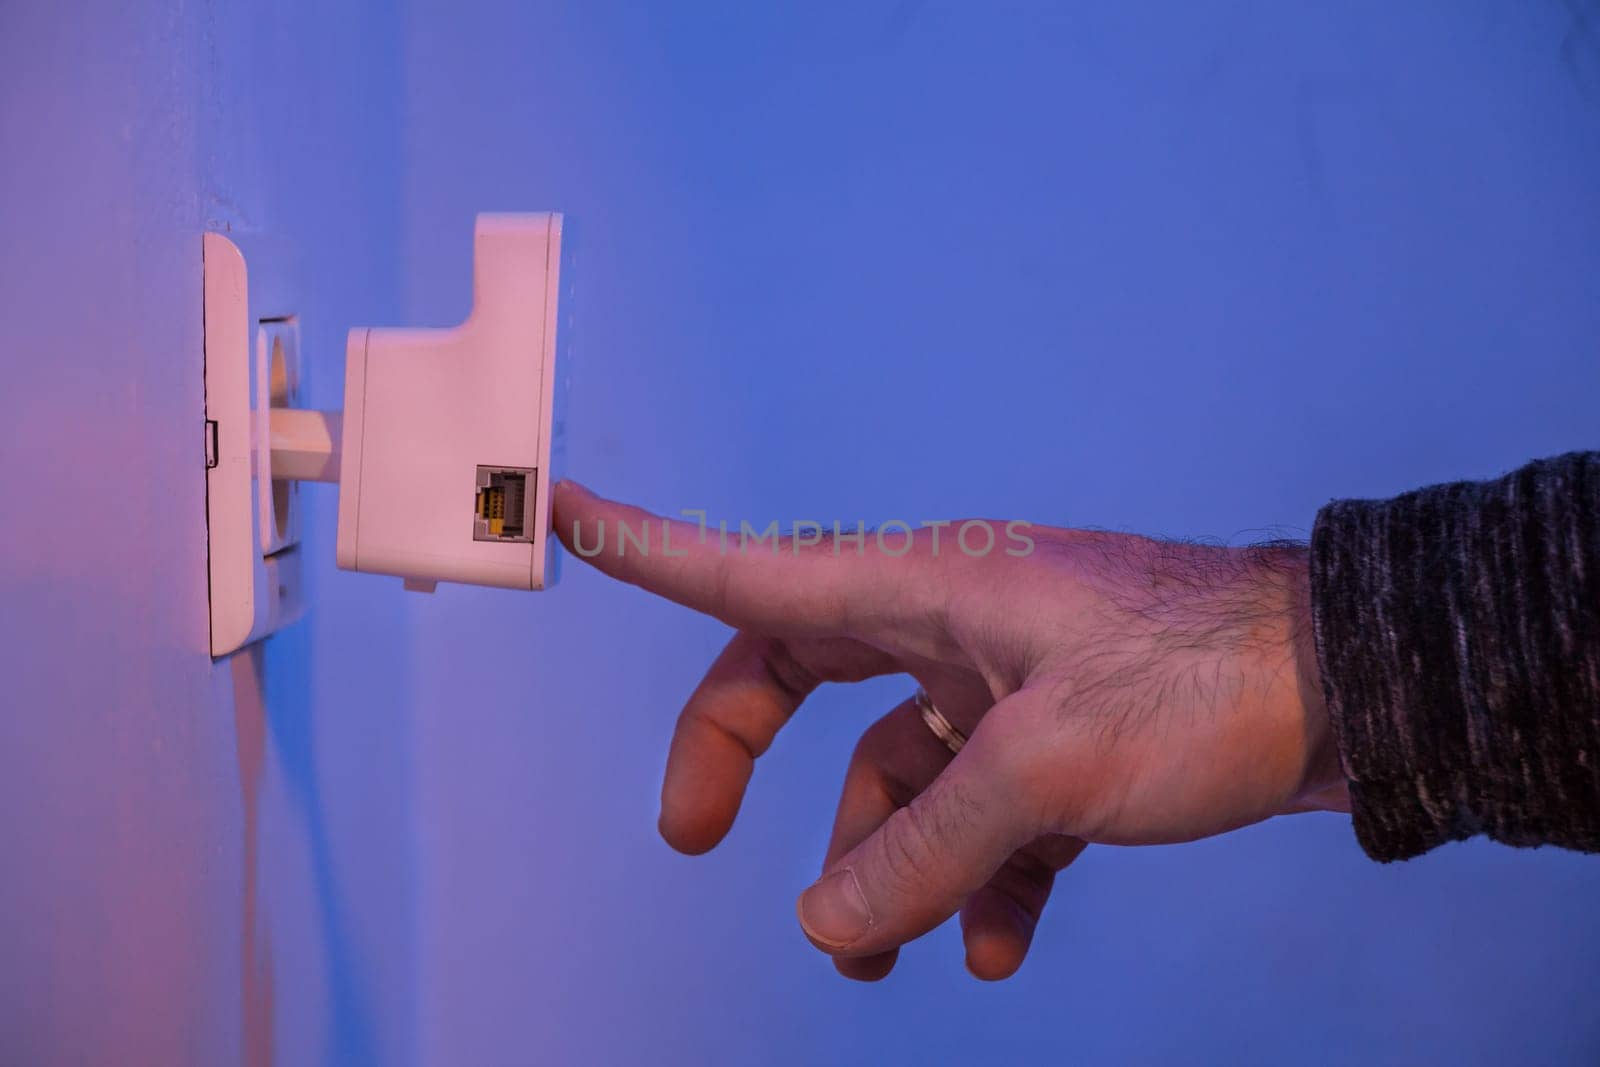 Man press with his finger on WPS button on WiFi repeater which is in electrical socket on the wall by wavemovies